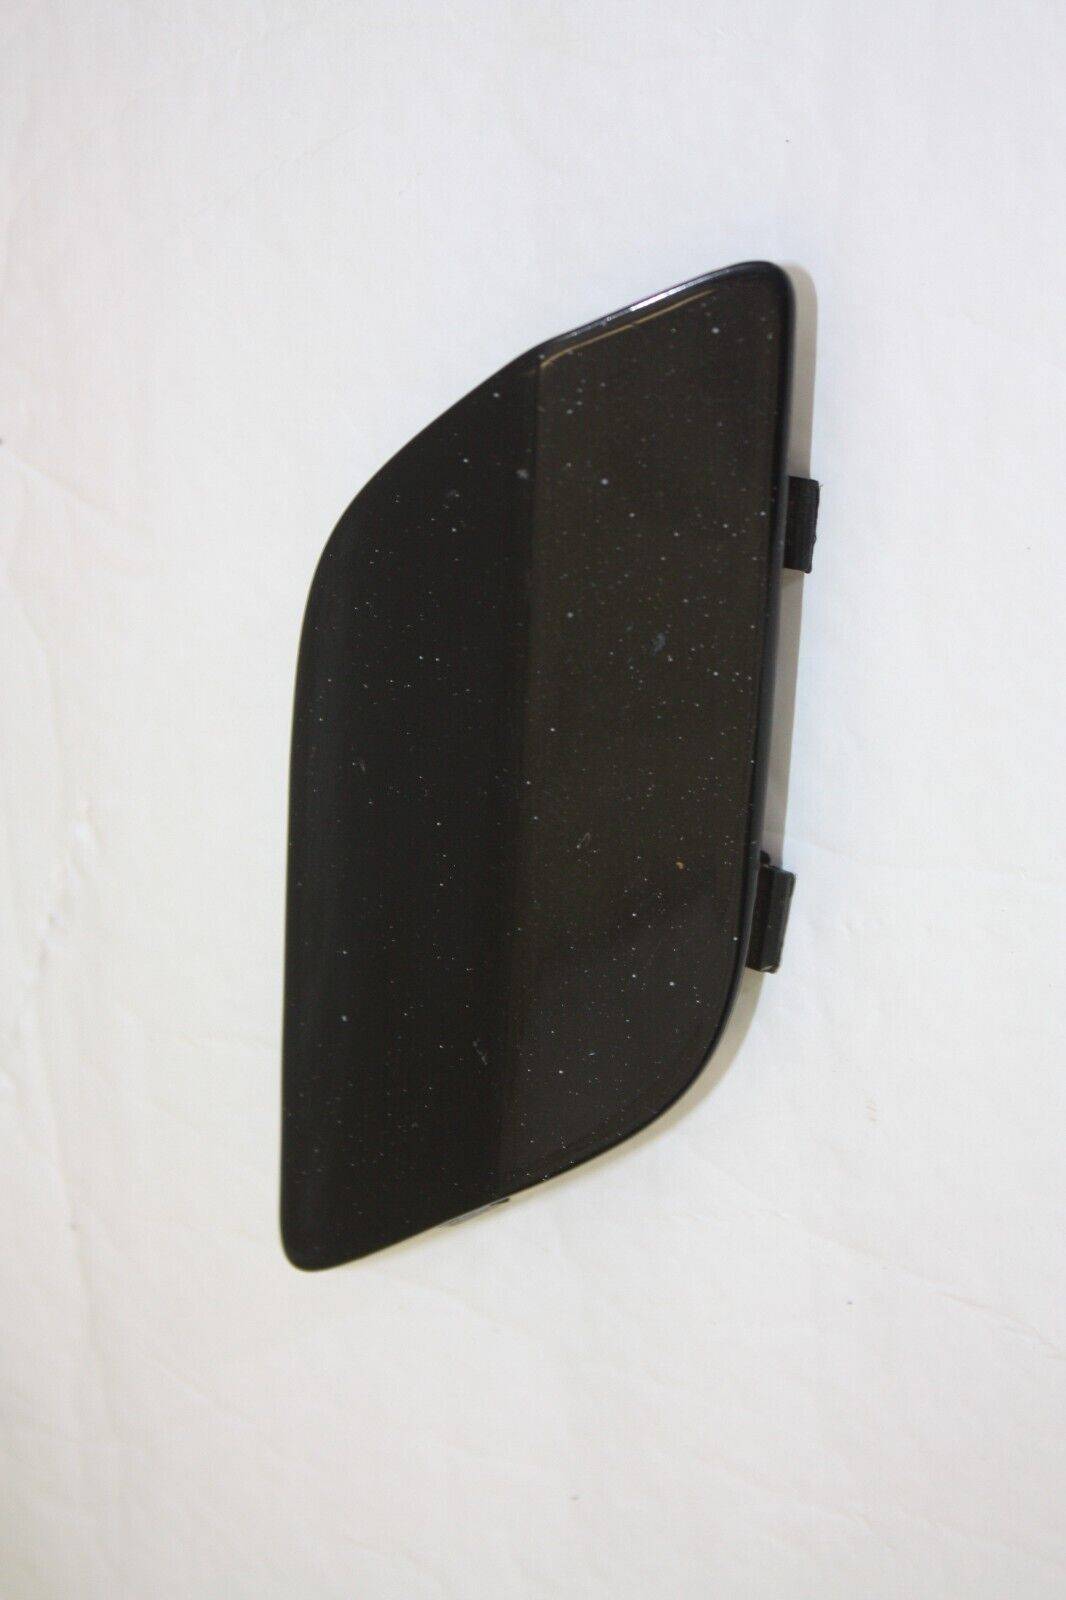 Vauxhall-Astra-H-Front-Bumper-Right-Washer-Cover-2004-to-2009-13126034-Genuine-176245369471-2